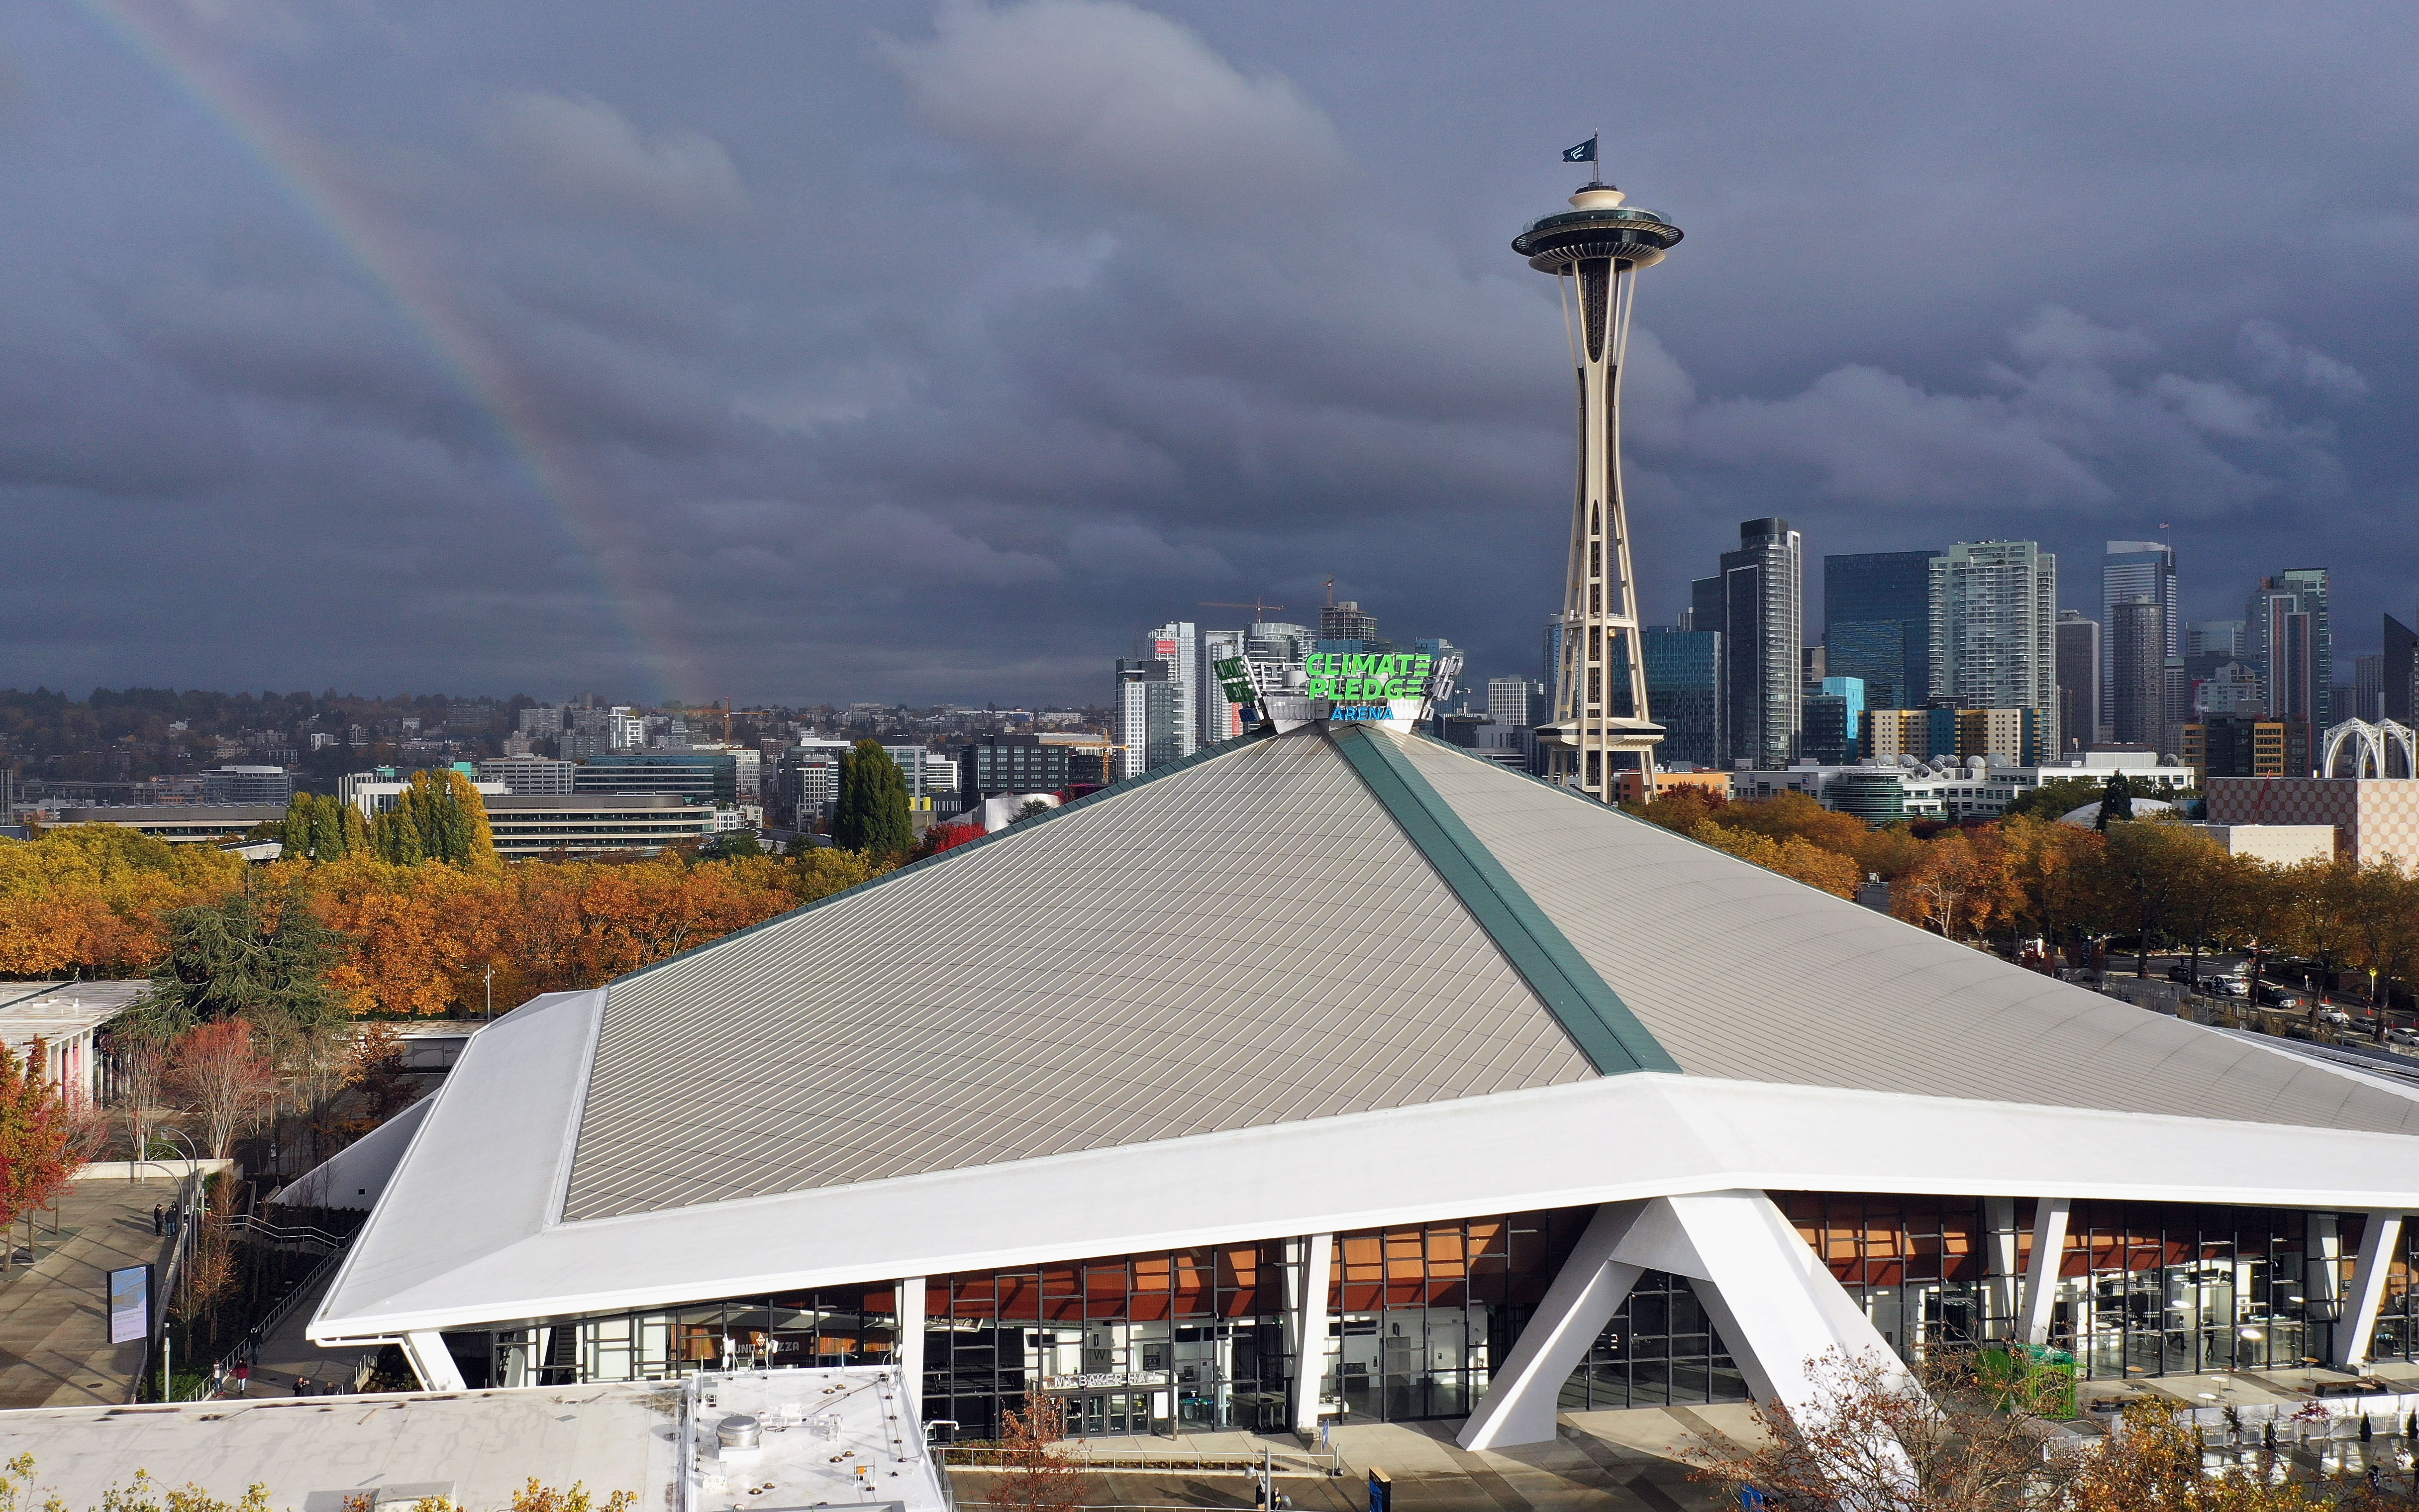 seattle new arena location